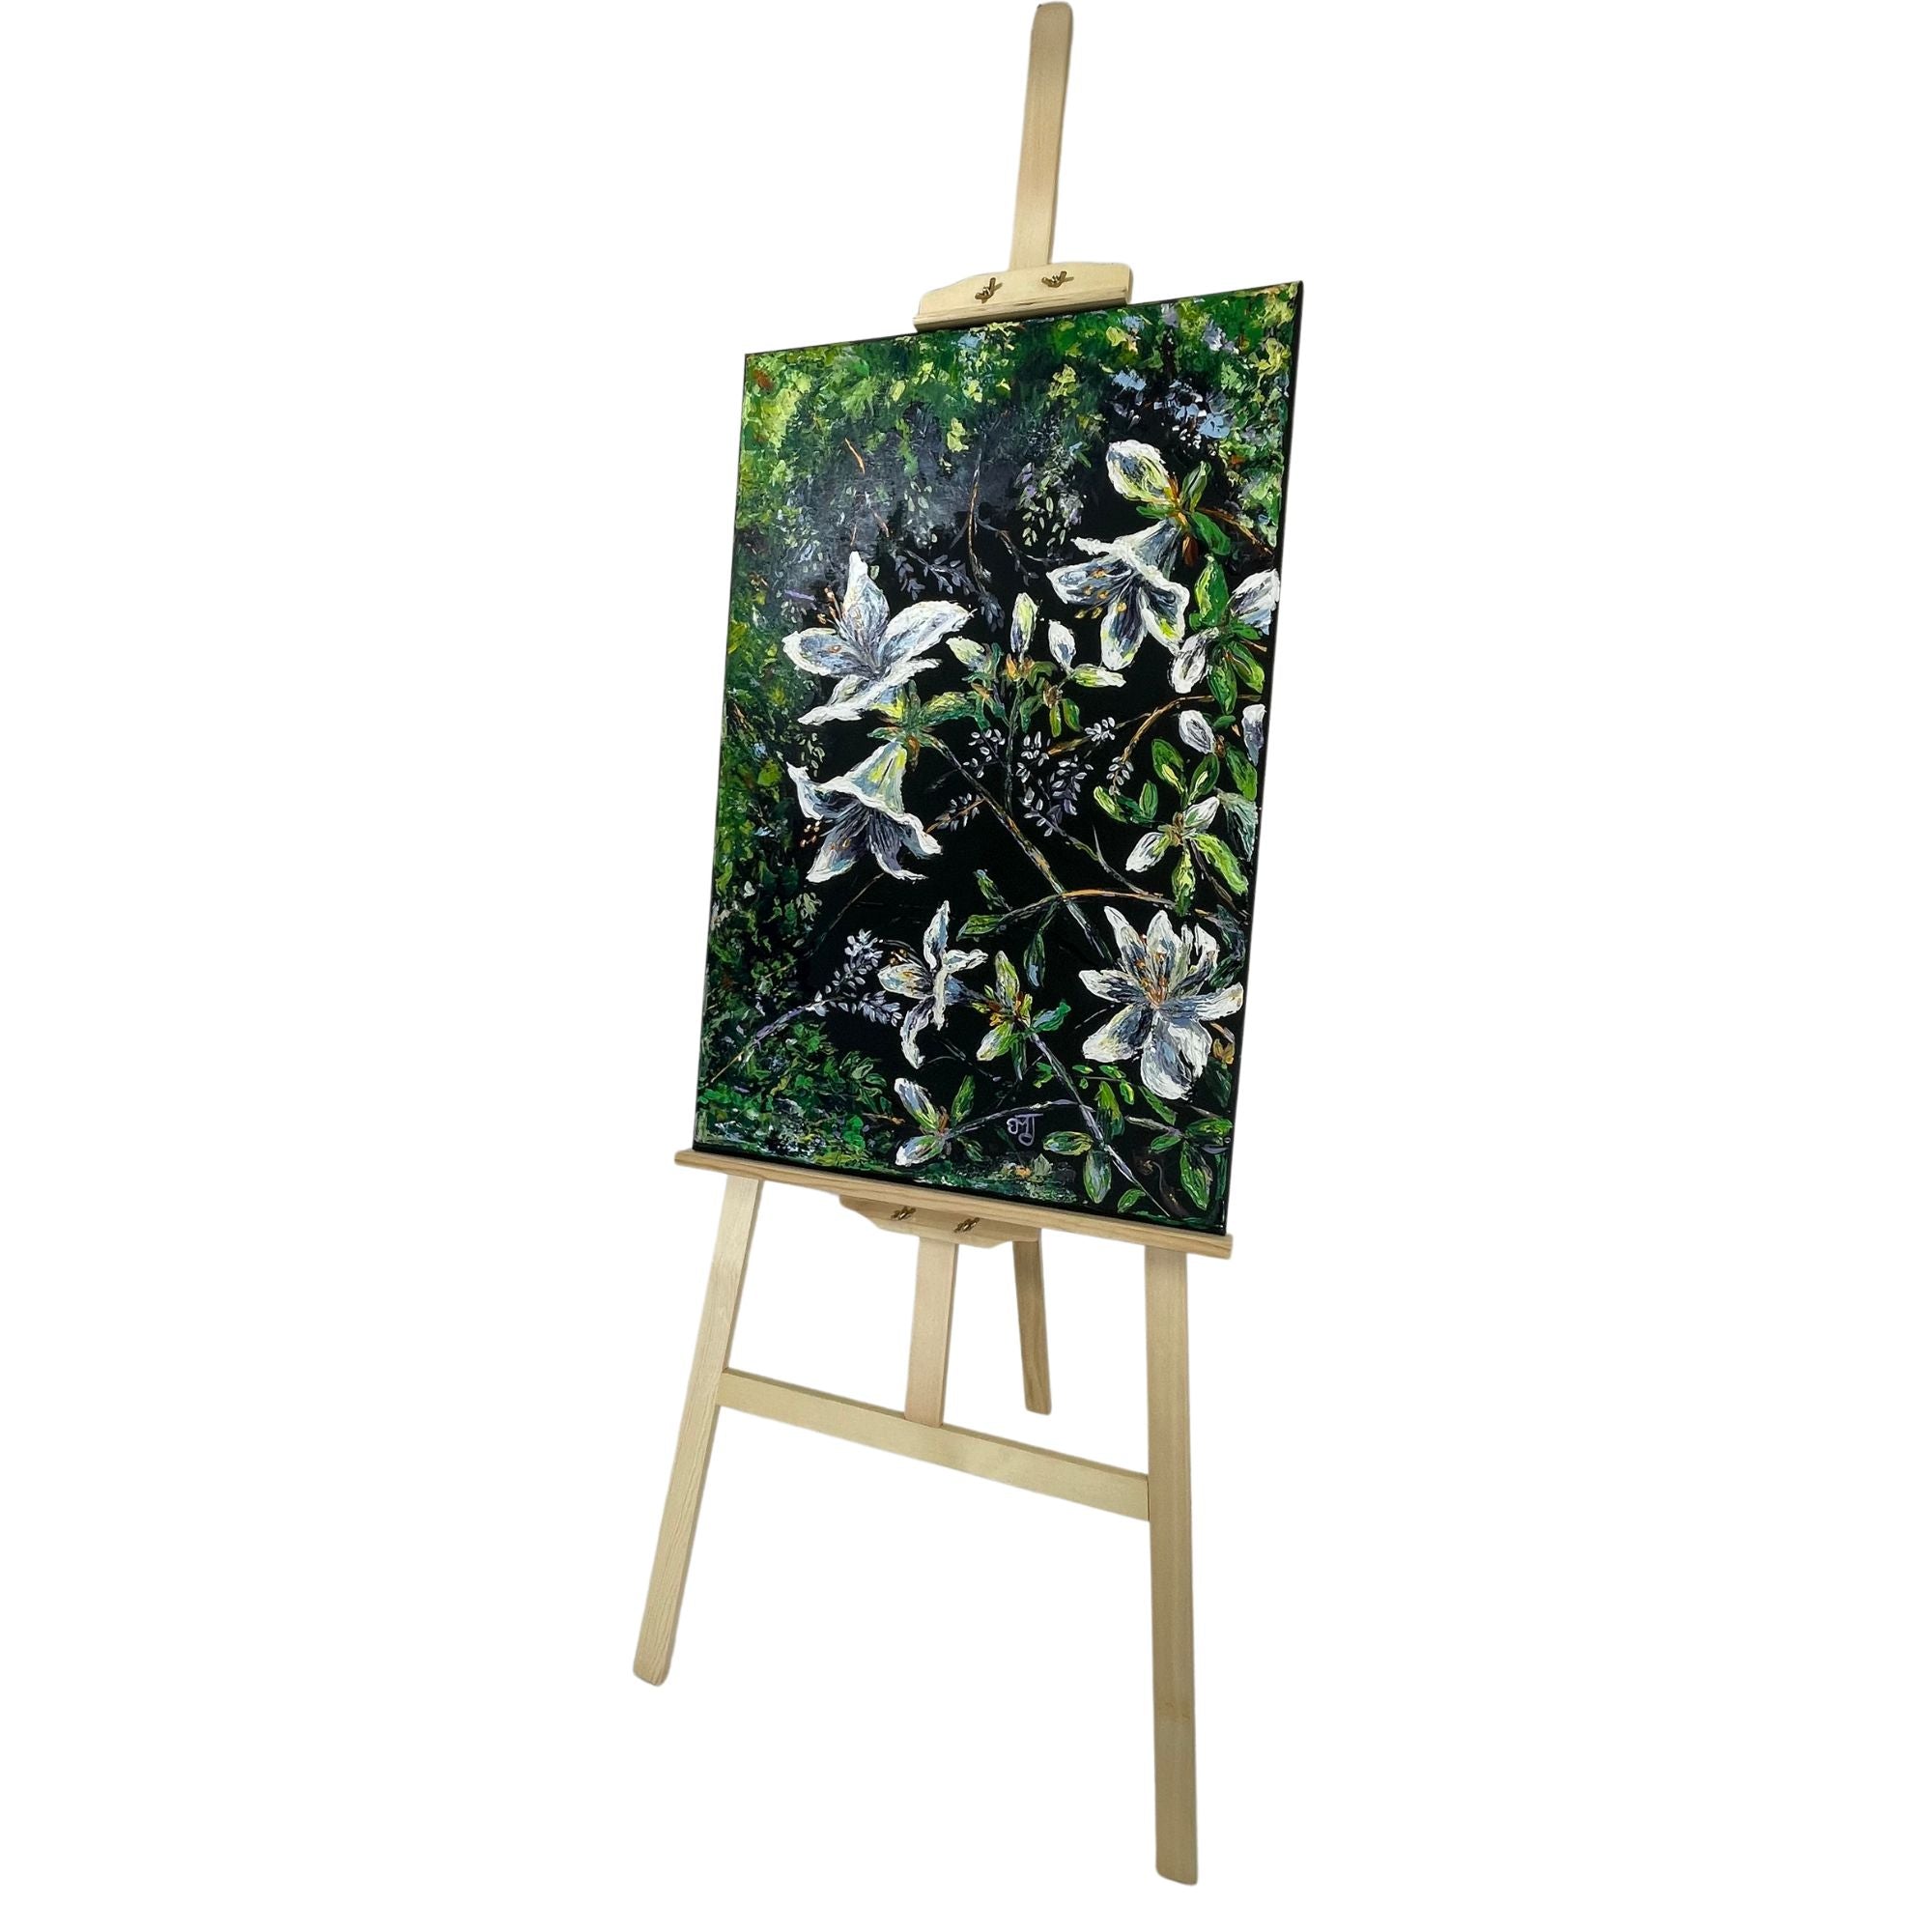 ARTdiscount Bowland Economy Display Easel with example canvas